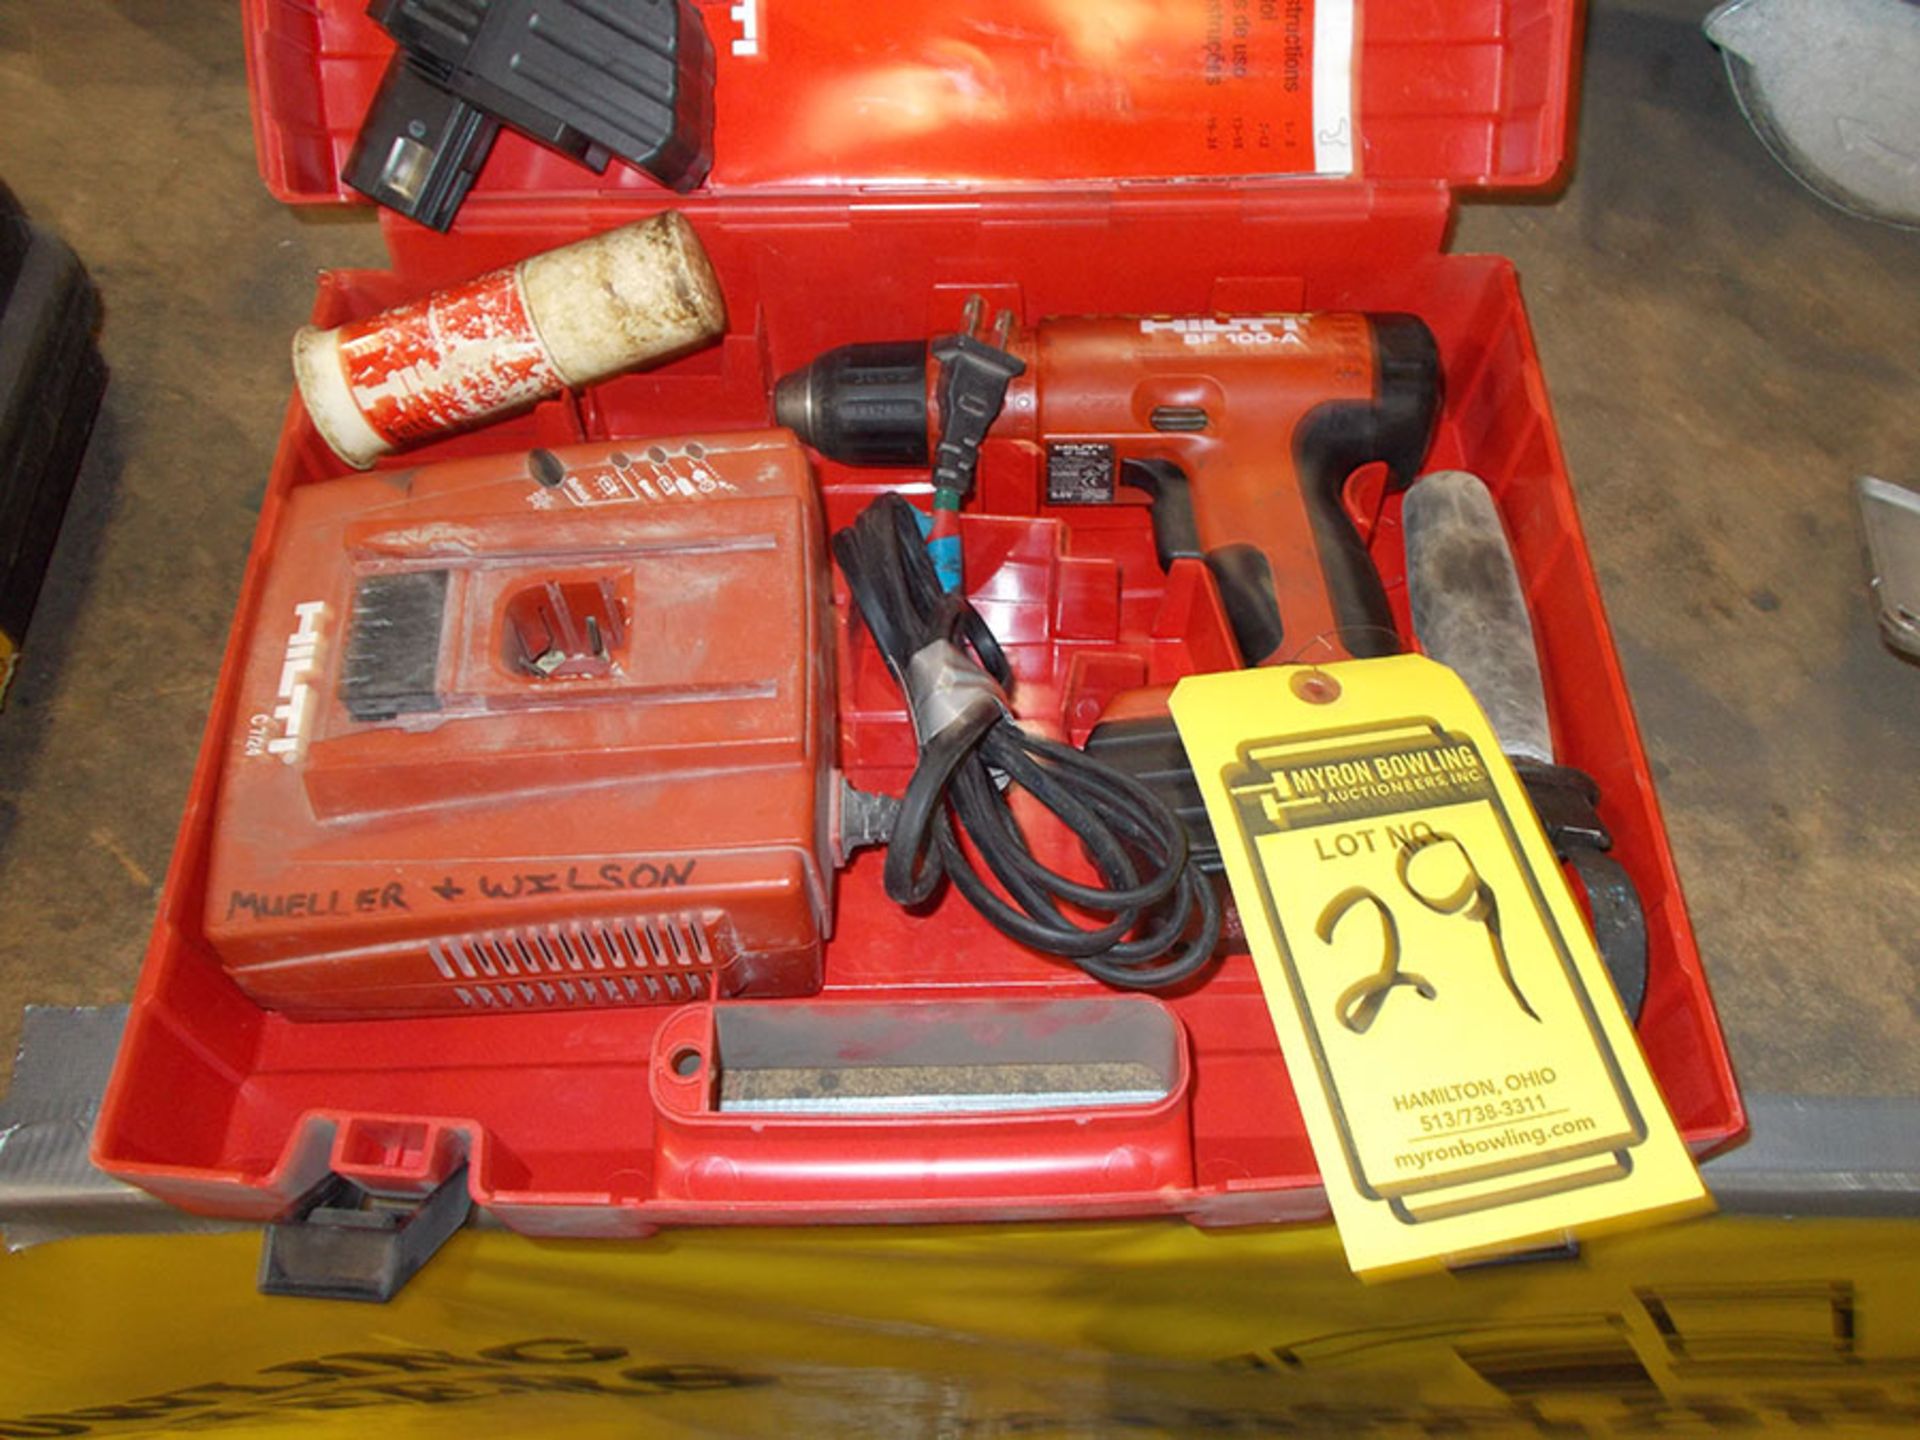 HILTI SF 100-A 2.0 AH BATTERY DRILL WITH SPEED CHUCK & CHARGER